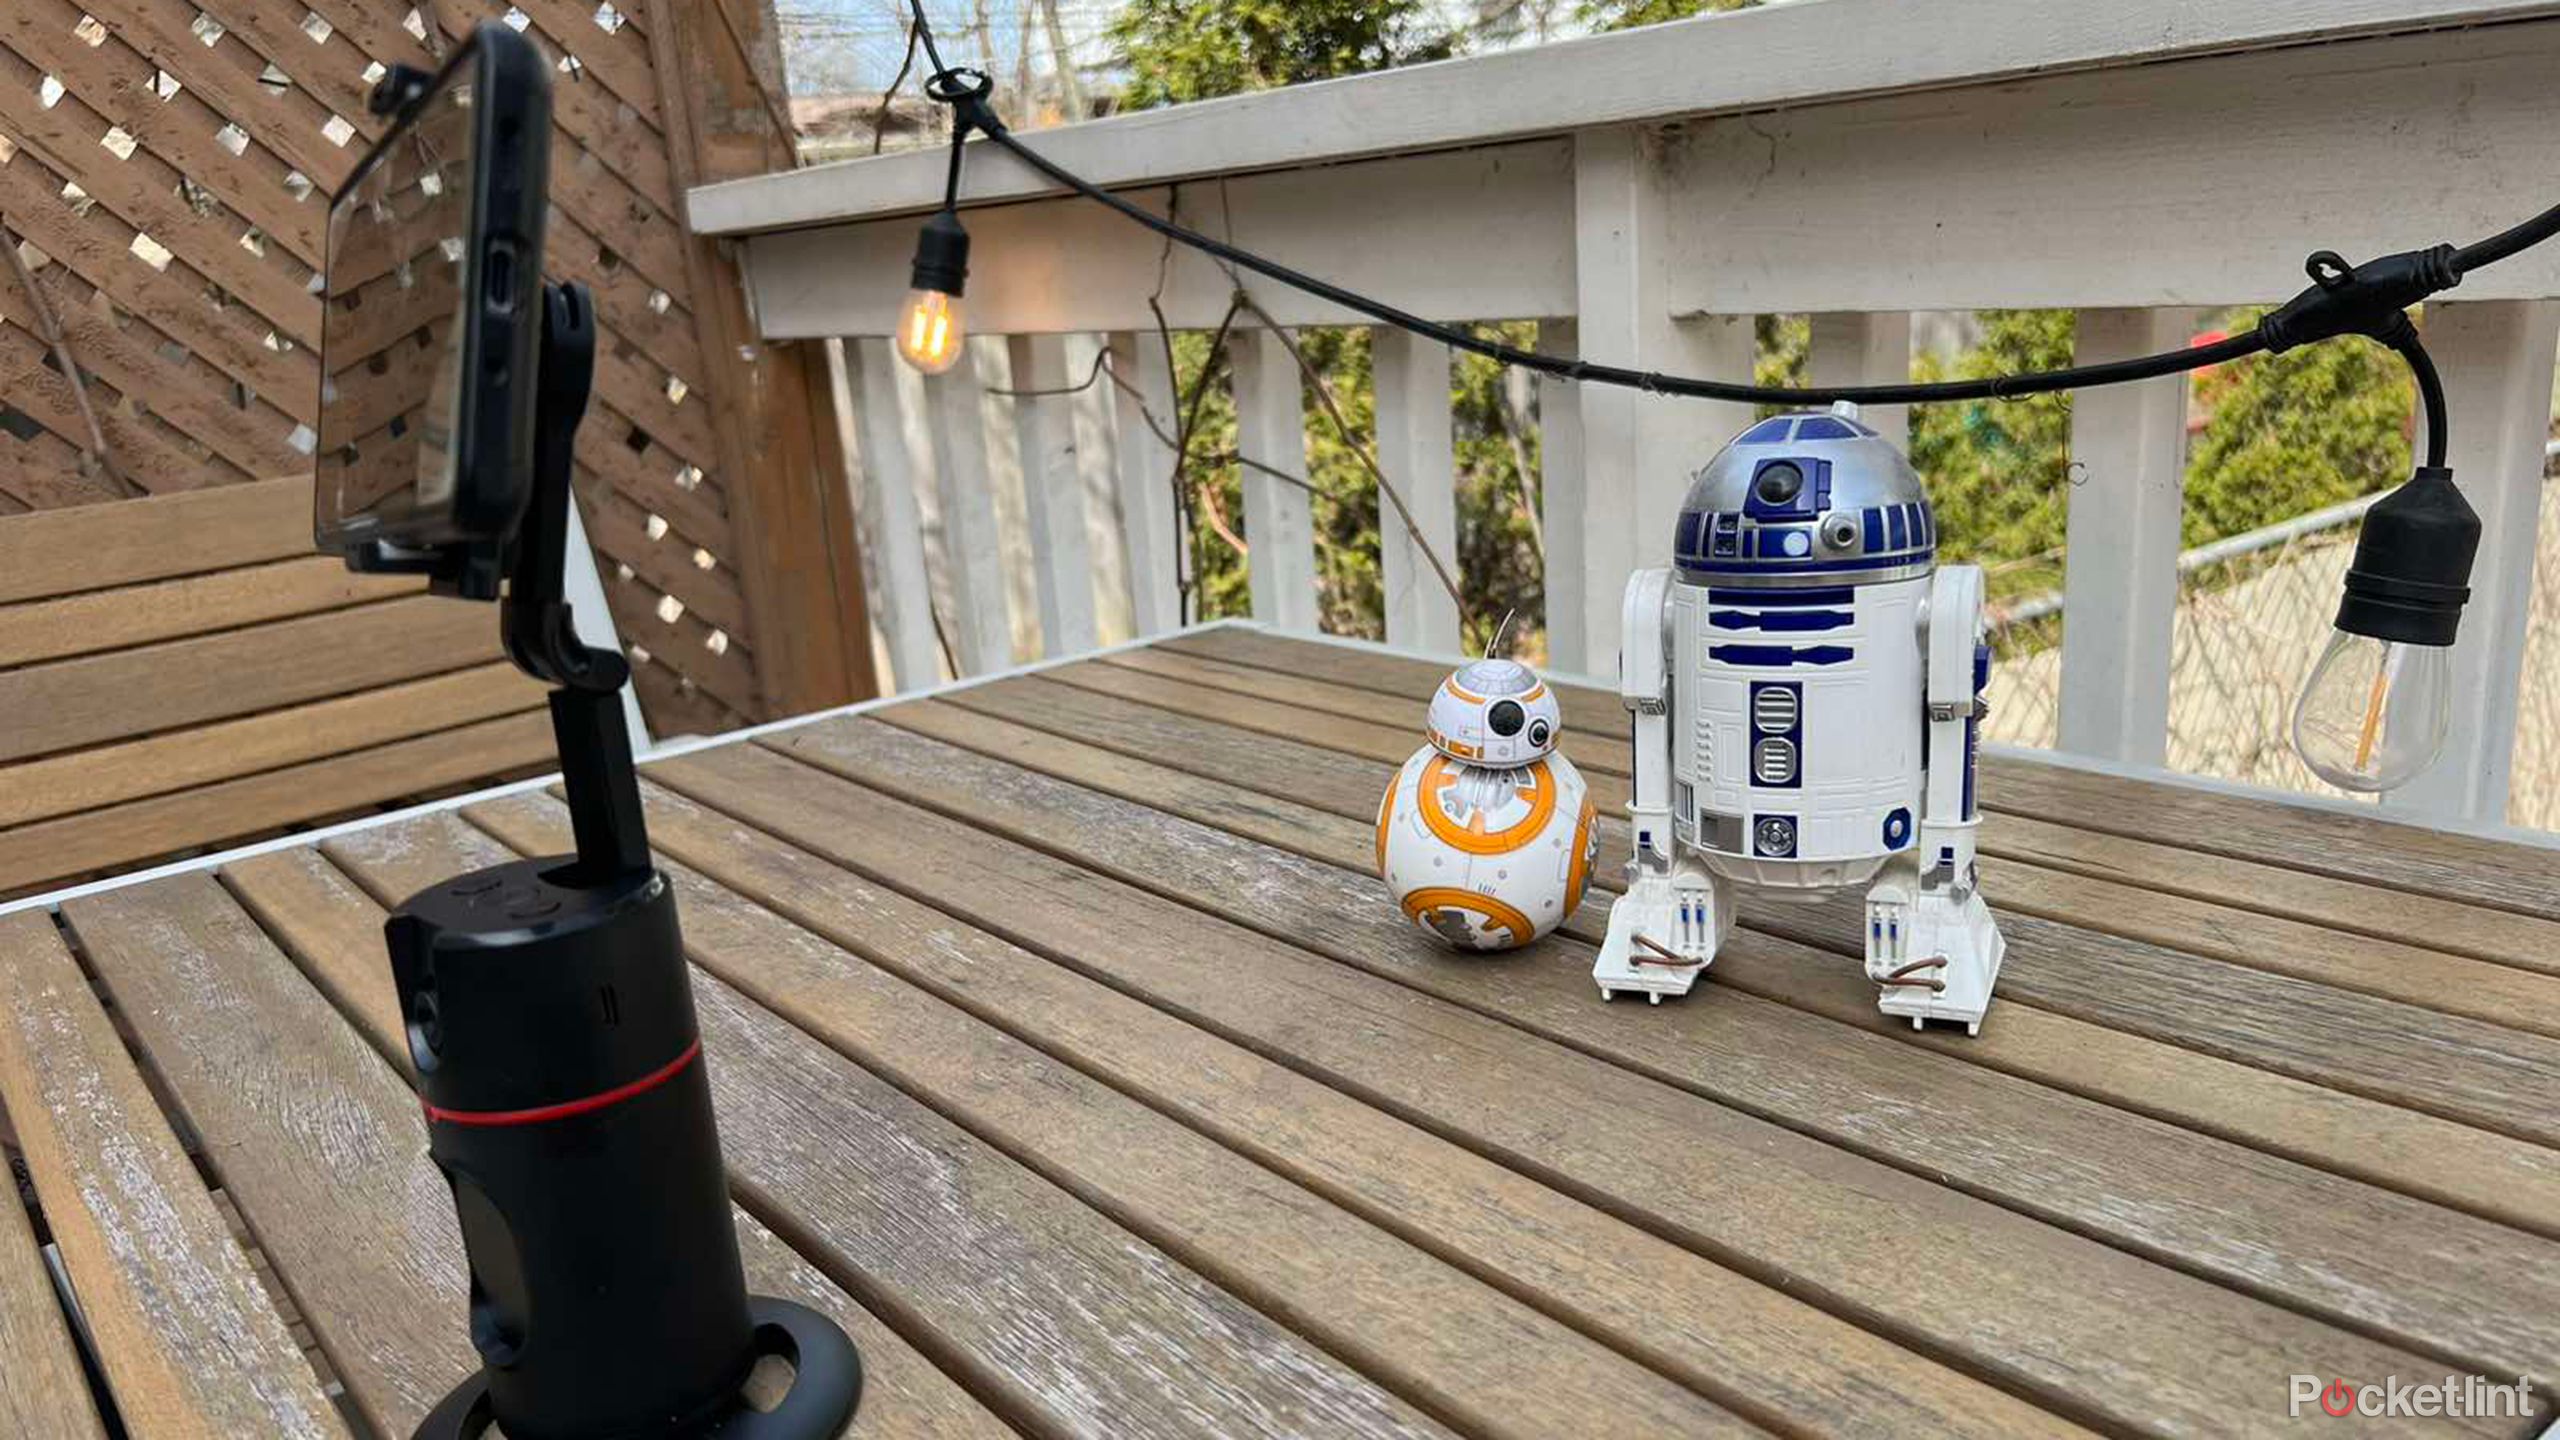 Afarer phone holder outside with droids